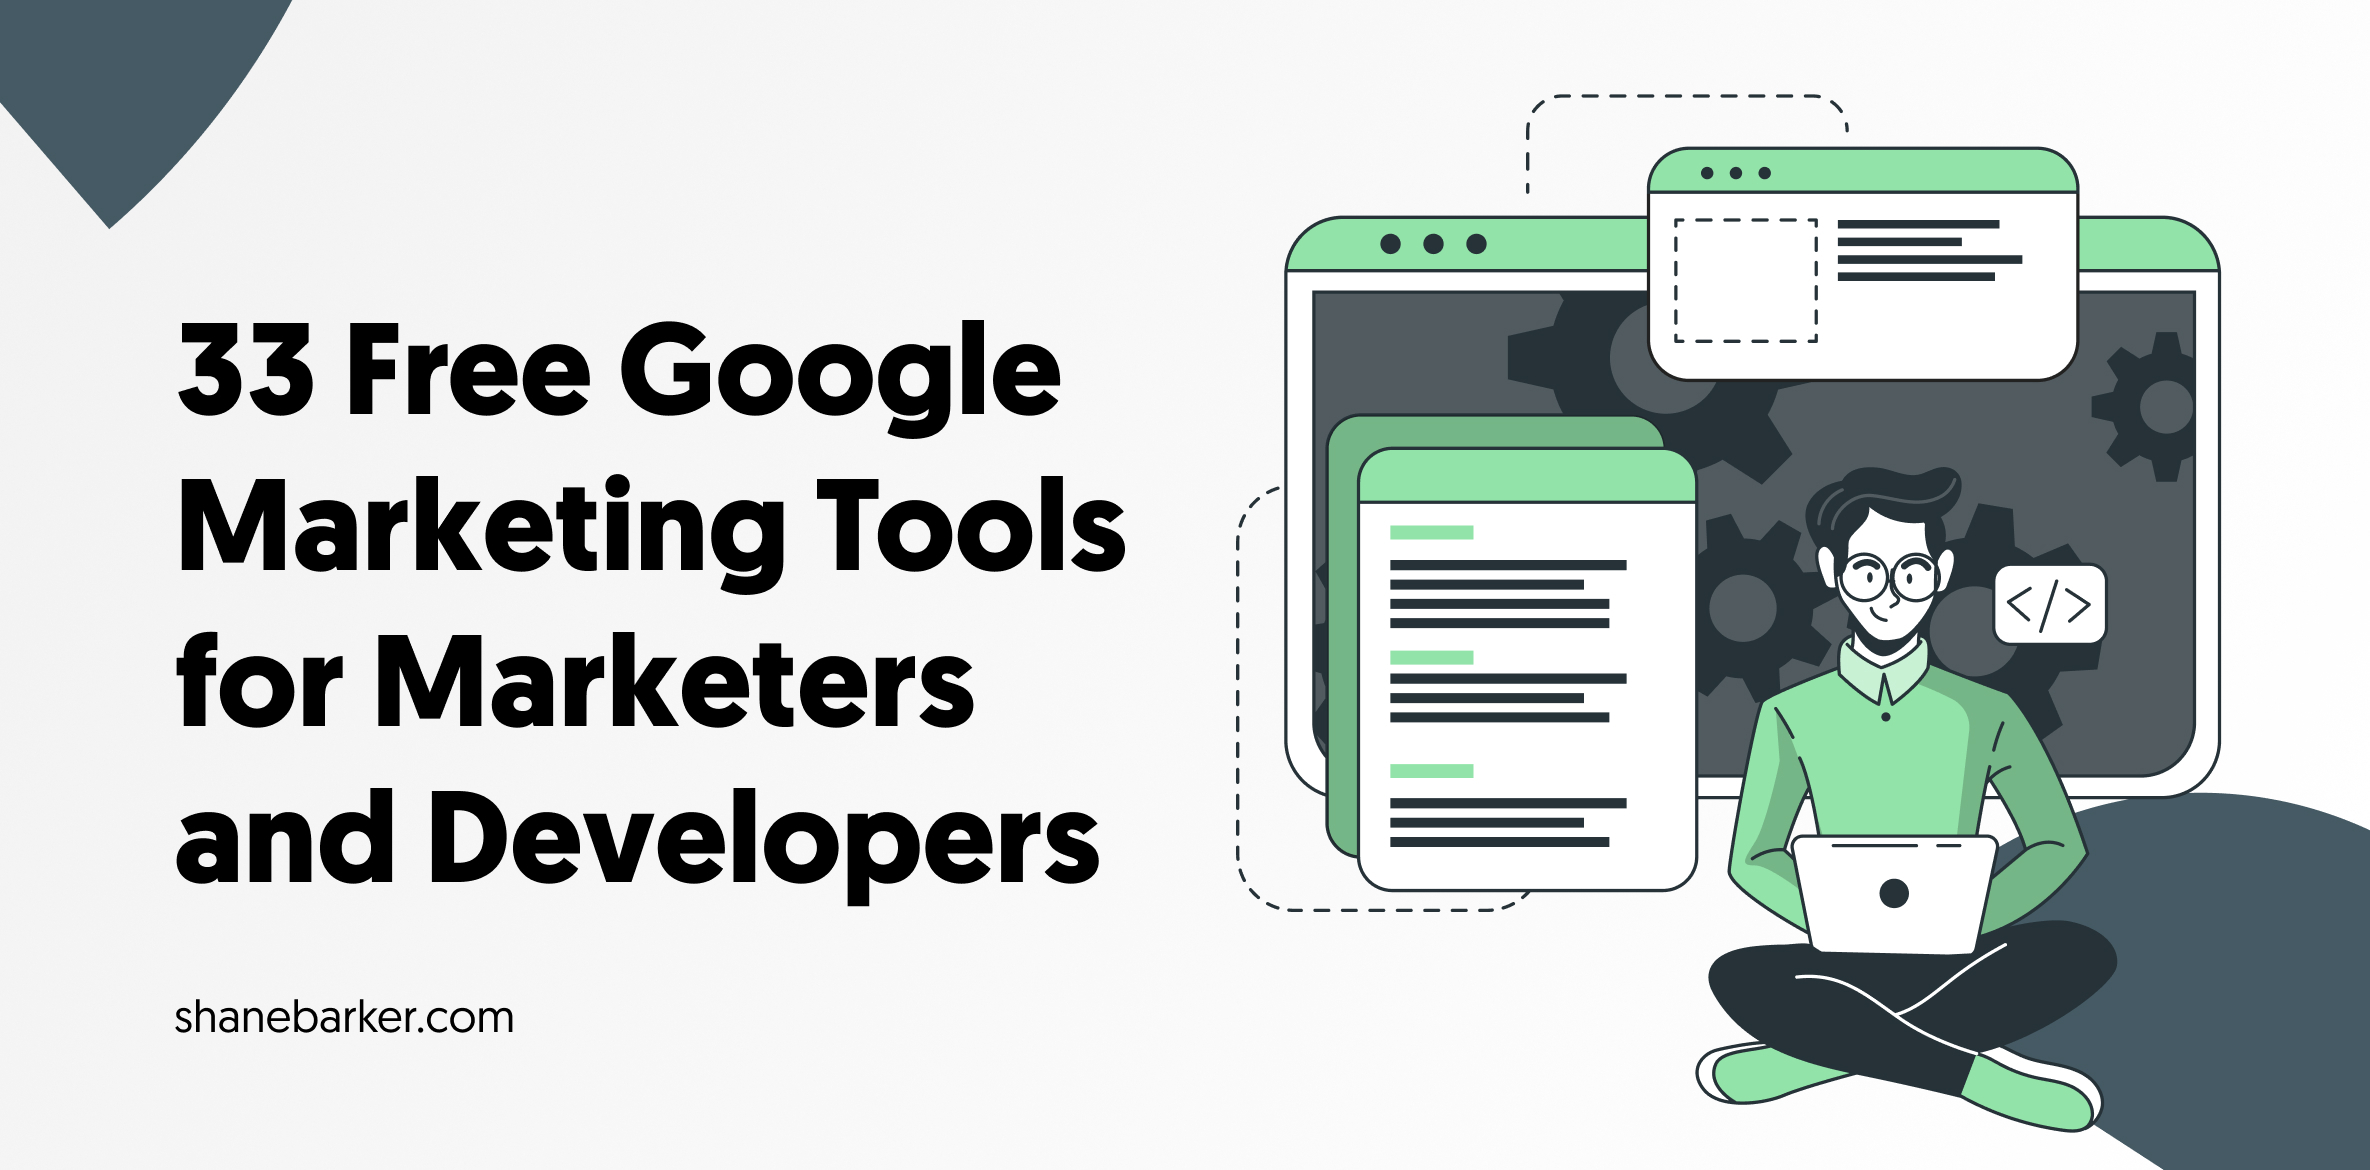 Free Google Marketing Tools for Marketers and Developers